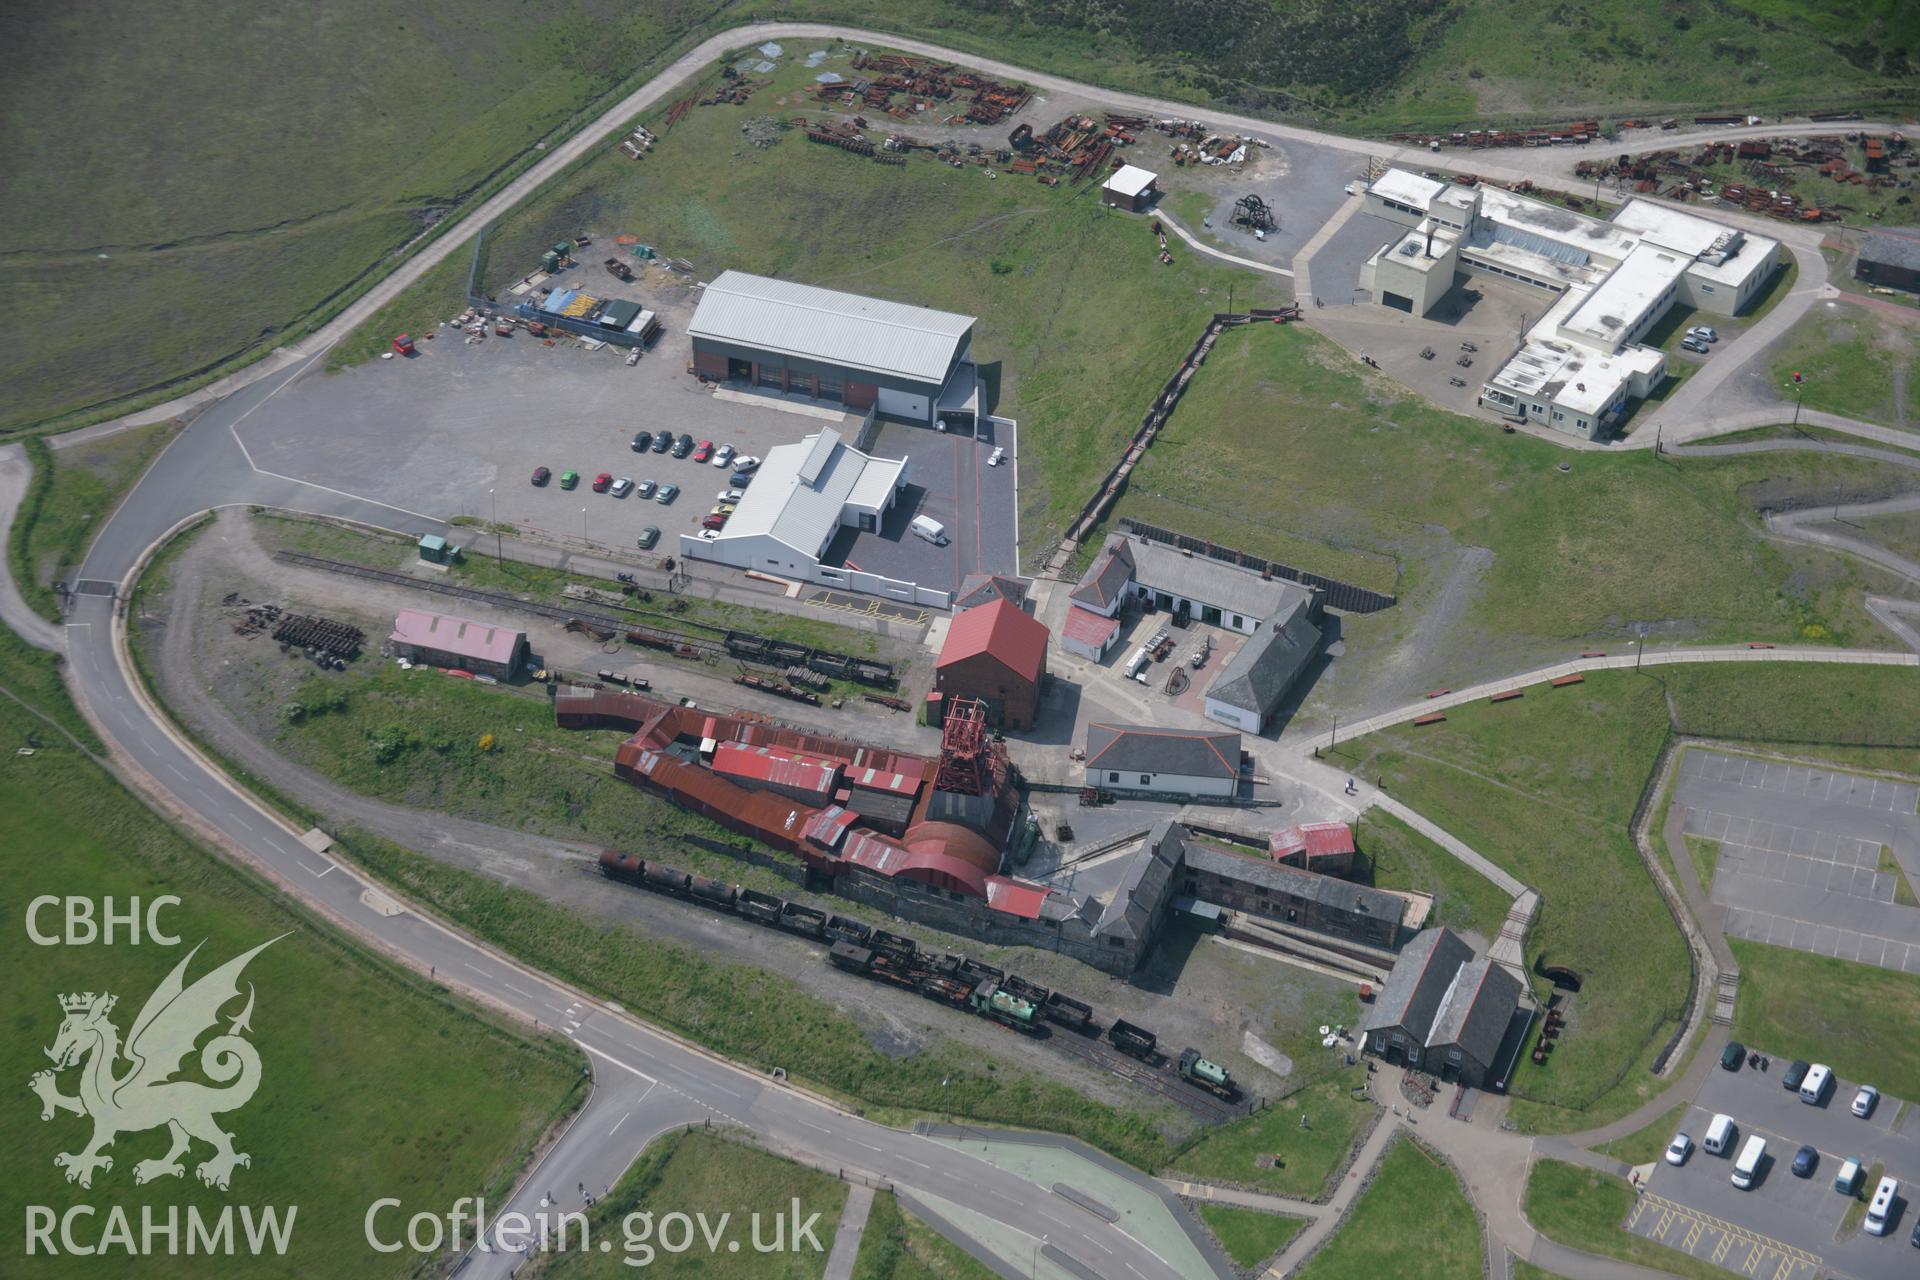 RCAHMW colour oblique aerial photograph of Big Pit Coal Mine, Blaenavon from the north. Taken on 09 June 2006 by Toby Driver.